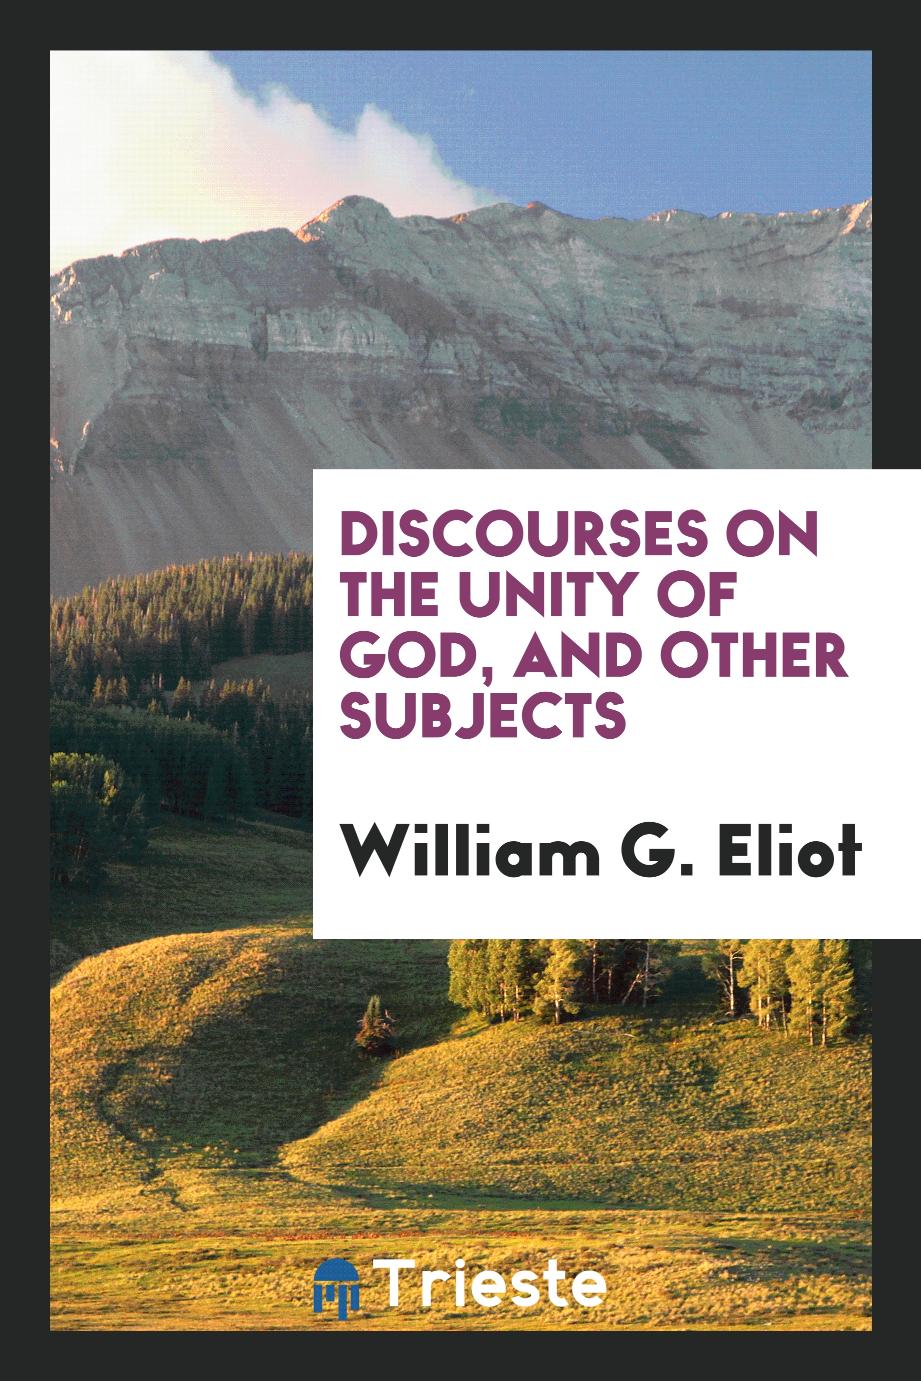 William G. Eliot - Discourses on the Unity of God, and Other Subjects